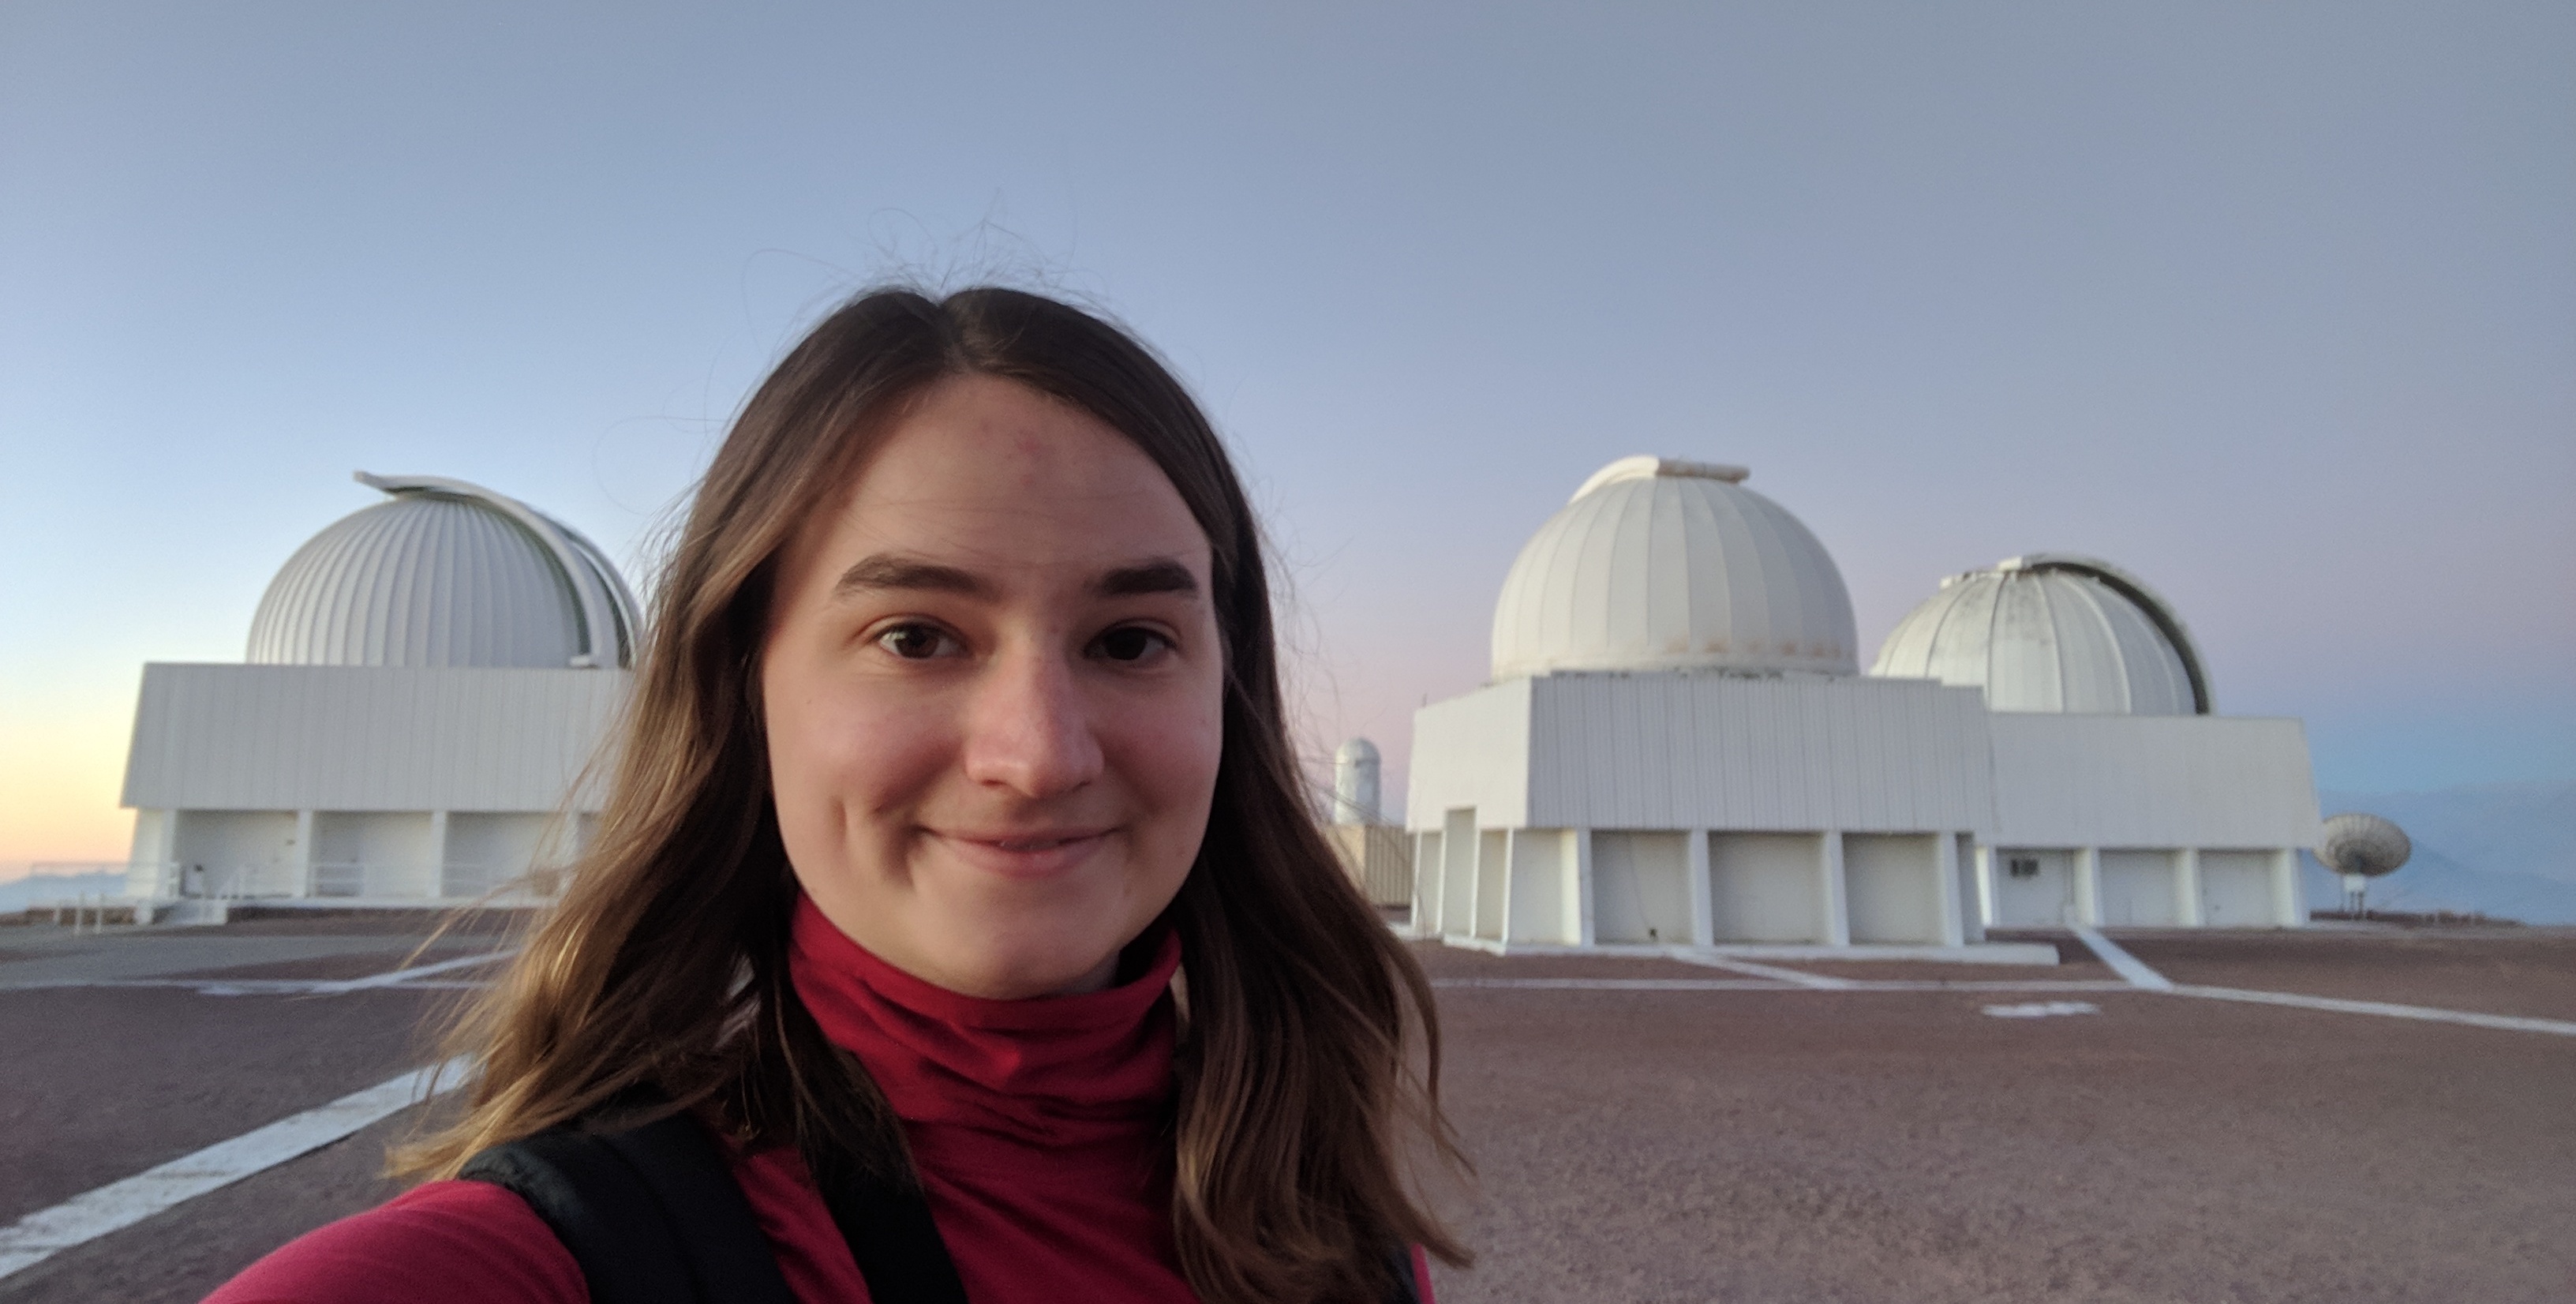 Rae at in front of several telescope domes